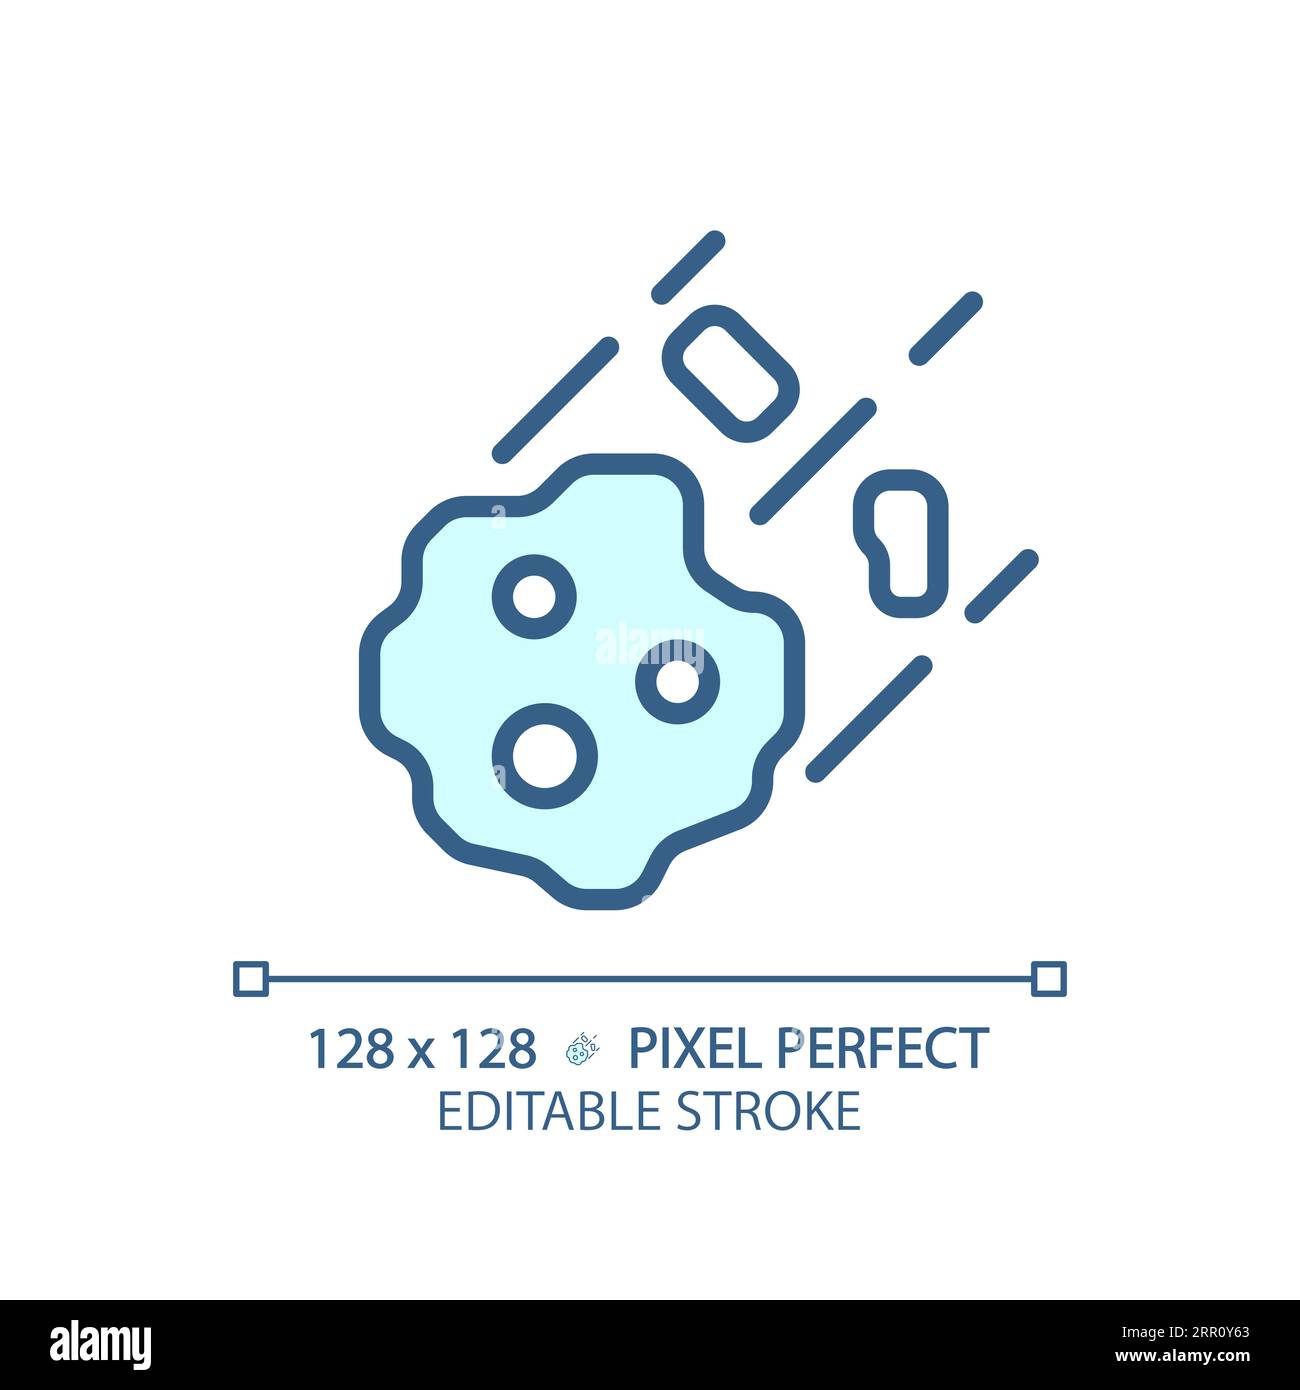 Asteroid pixel perfect light blue icon Stock Vector